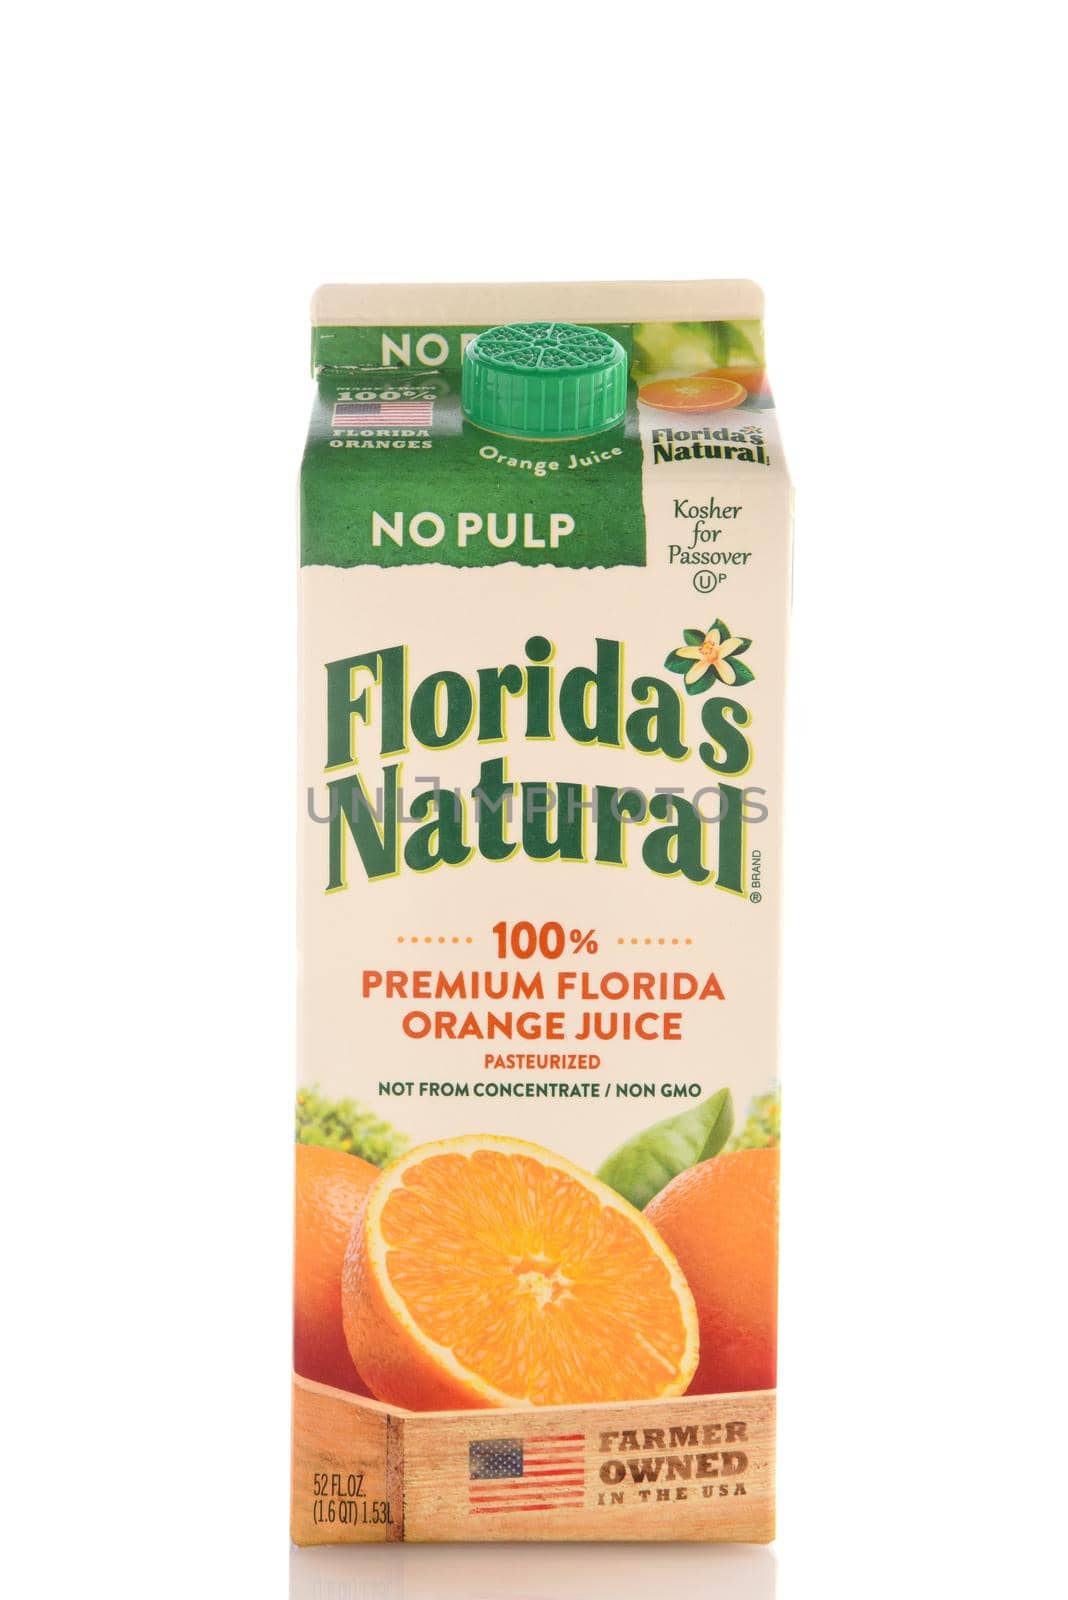 A 52 ounce container of Floridas Natural Premium Florida Orange Juice with No Pulp by sCukrov